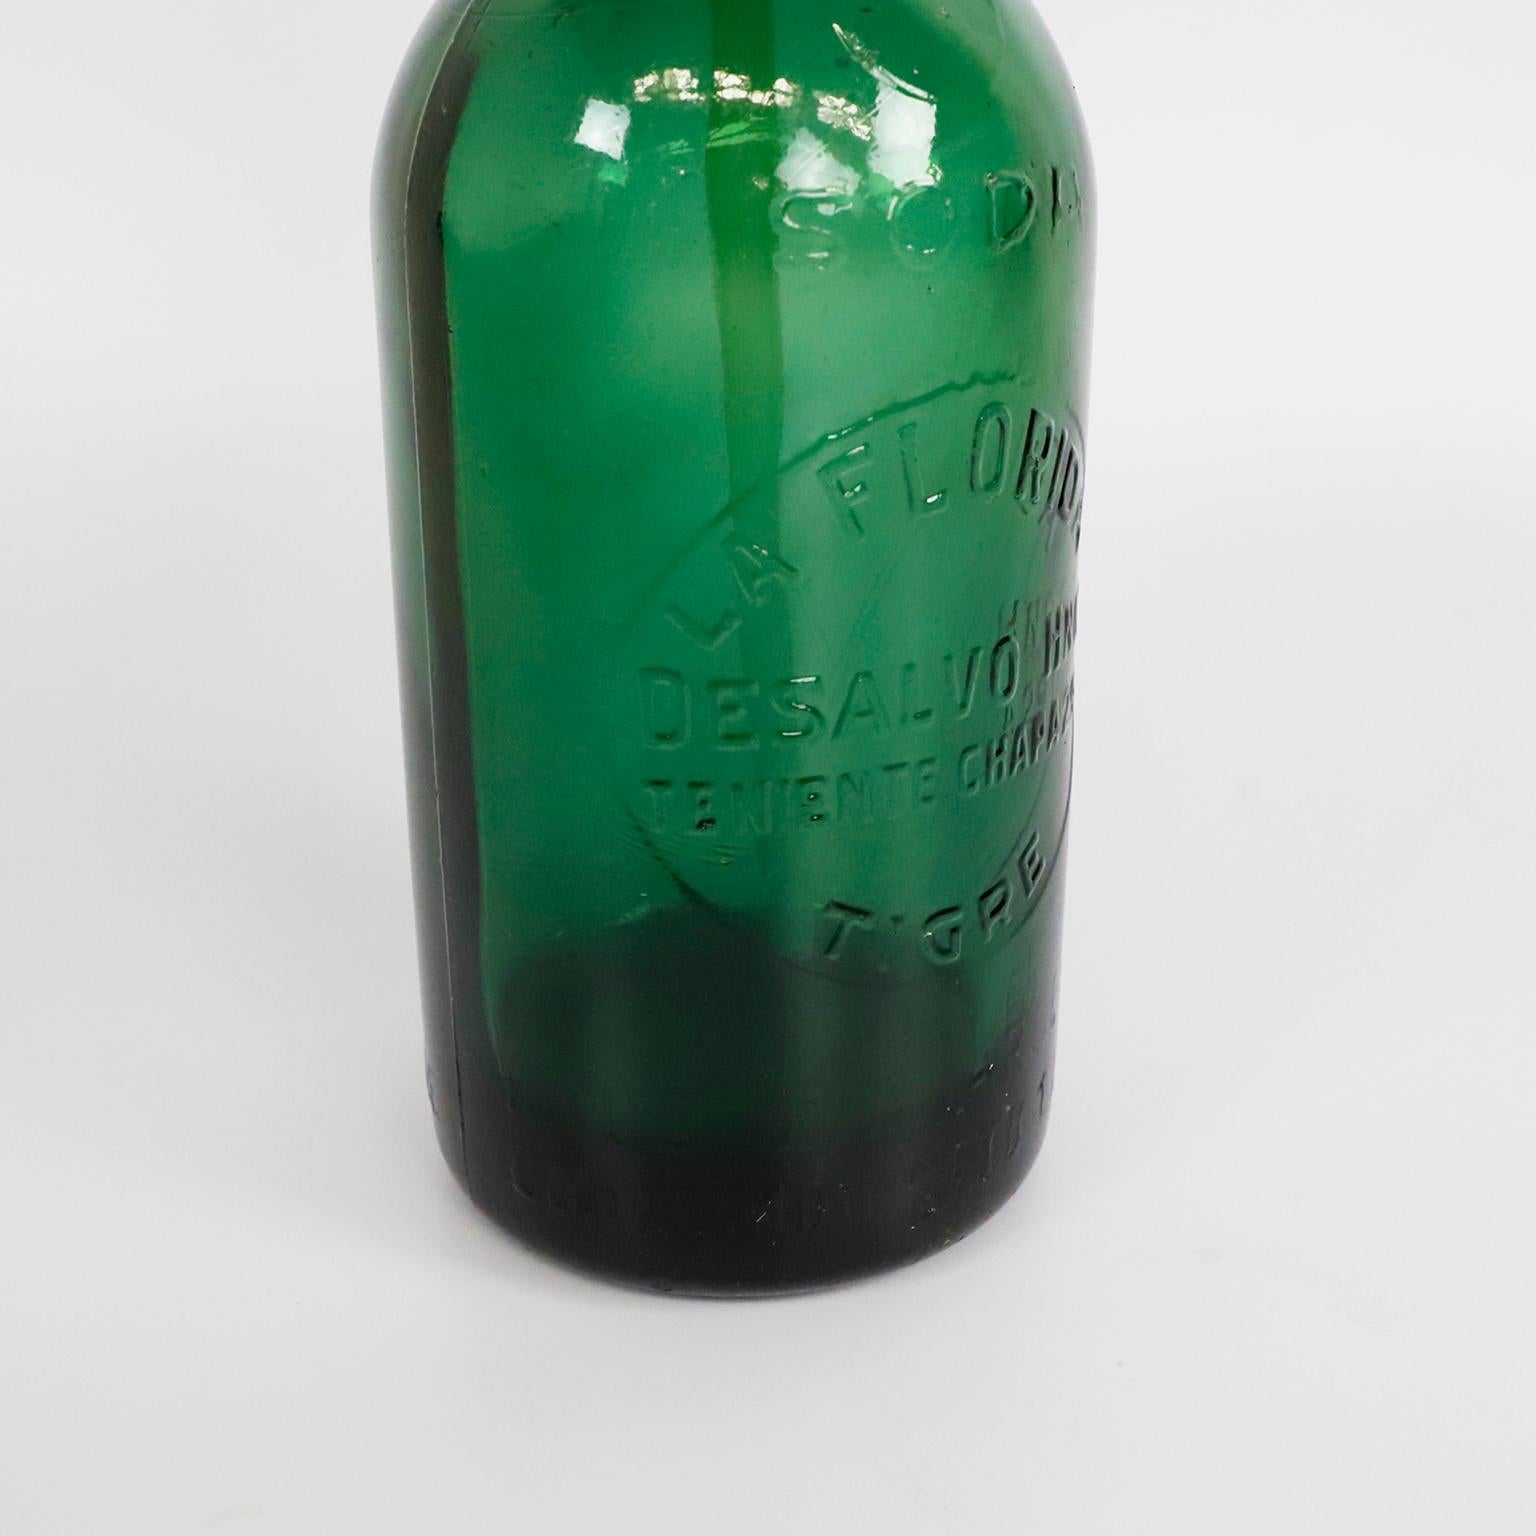 Circa 1940. We offer this Vintage green soda Siphon, made in Argentina.